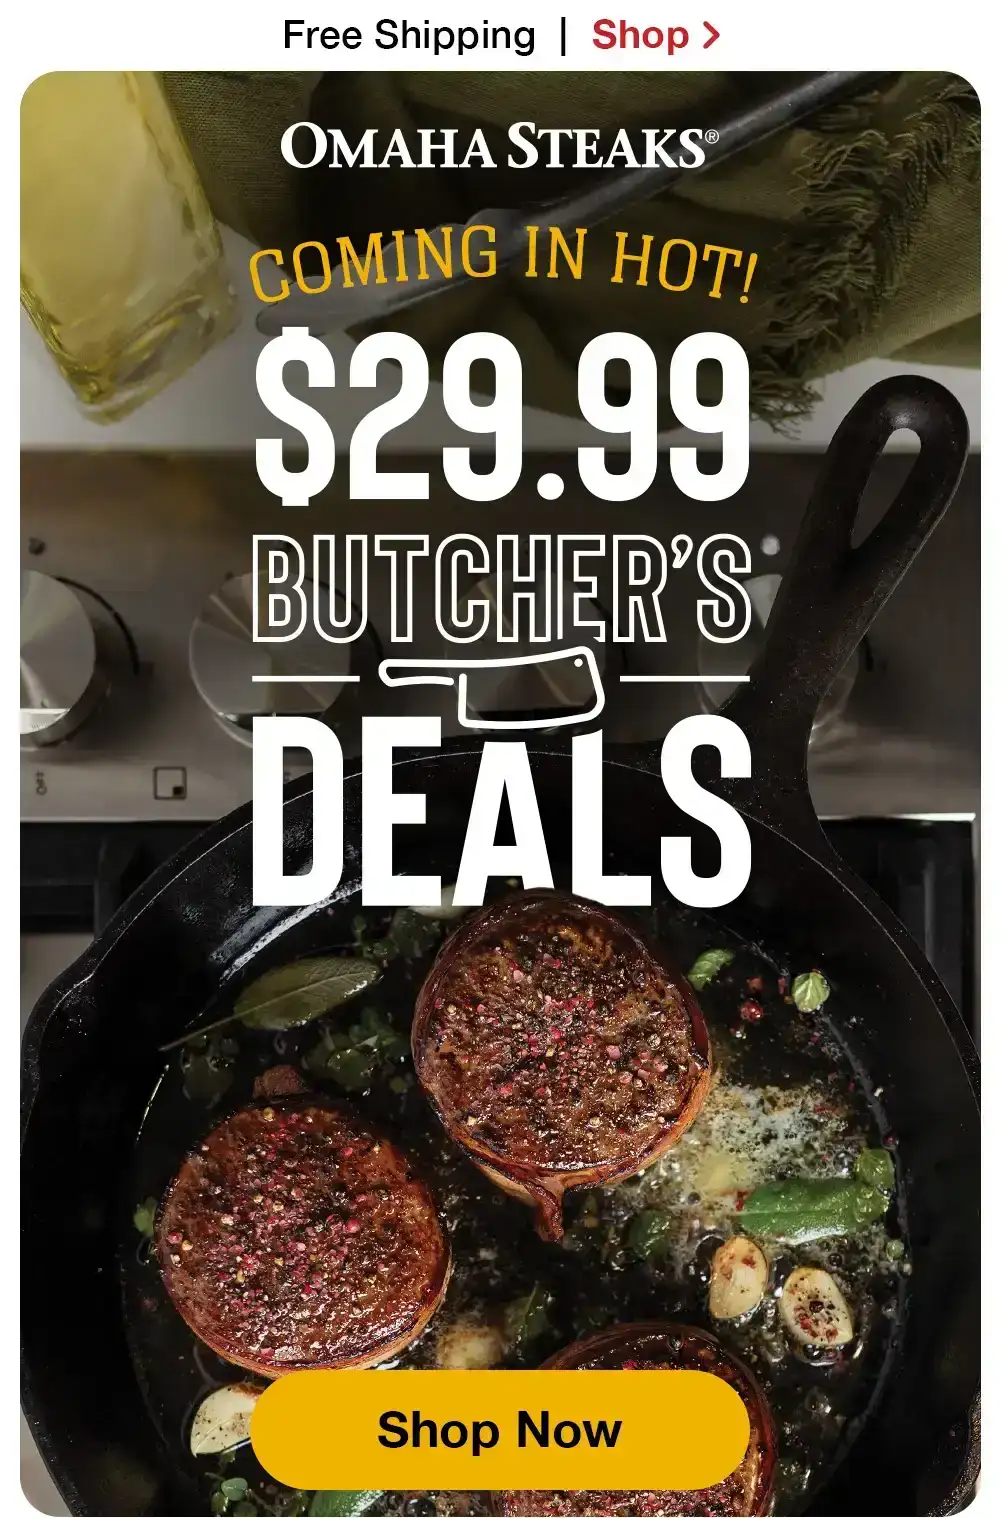 Free Shipping | Shop > OMAHA STEAKS� | COMING IN HOT! \\$29.99 BUTCHER'S DEALS || Shop Now